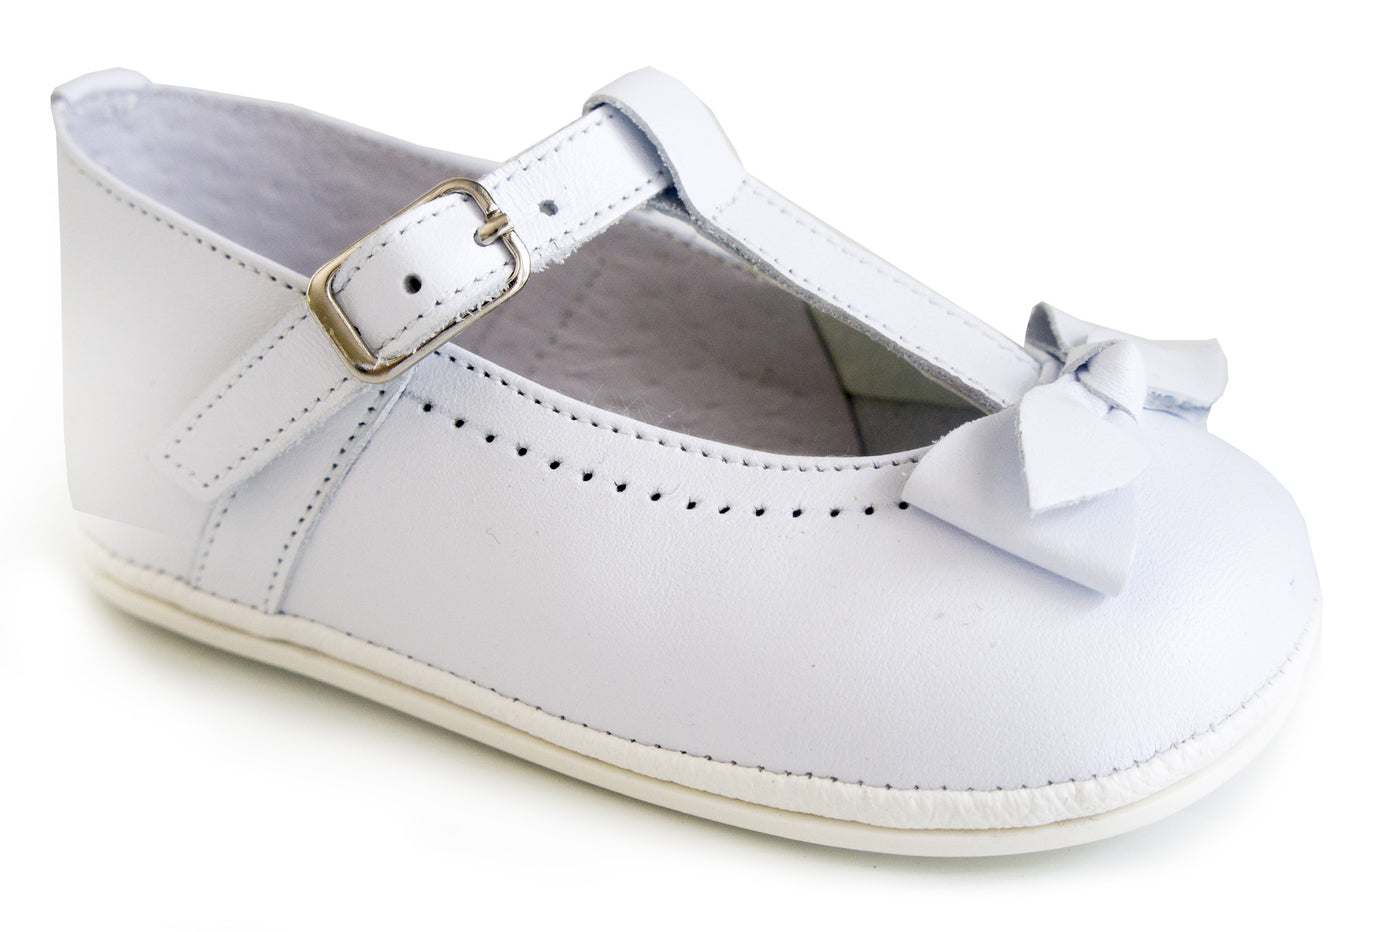 Patucos Infant Classic Leather White Shoes with lace for Girls